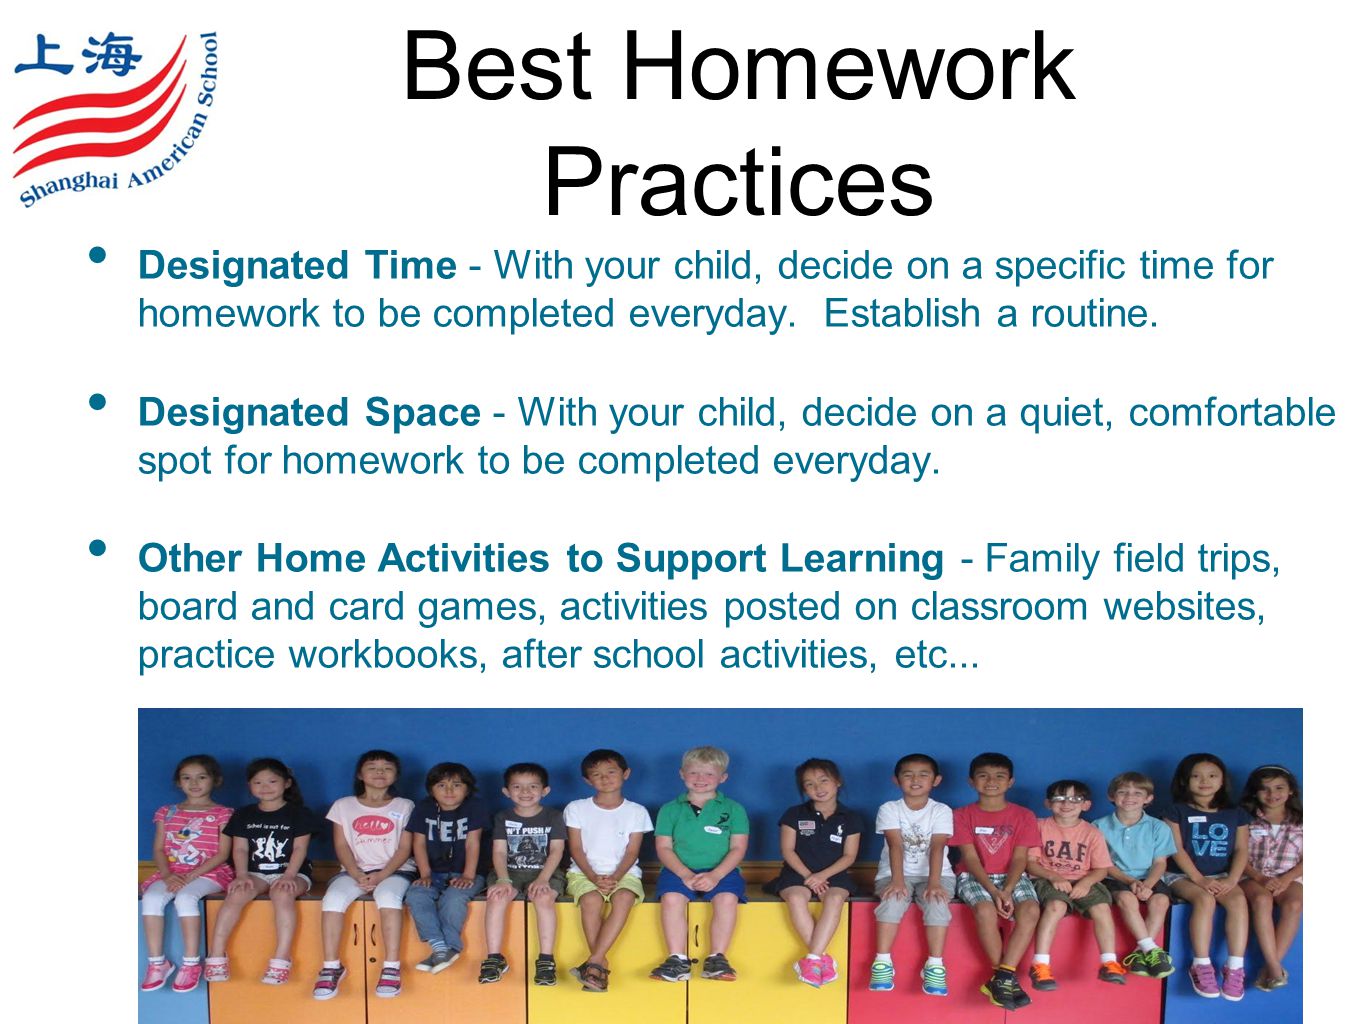 Best Homework Practices Designated Time - With your child, decide on a specific time for homework to be completed everyday.